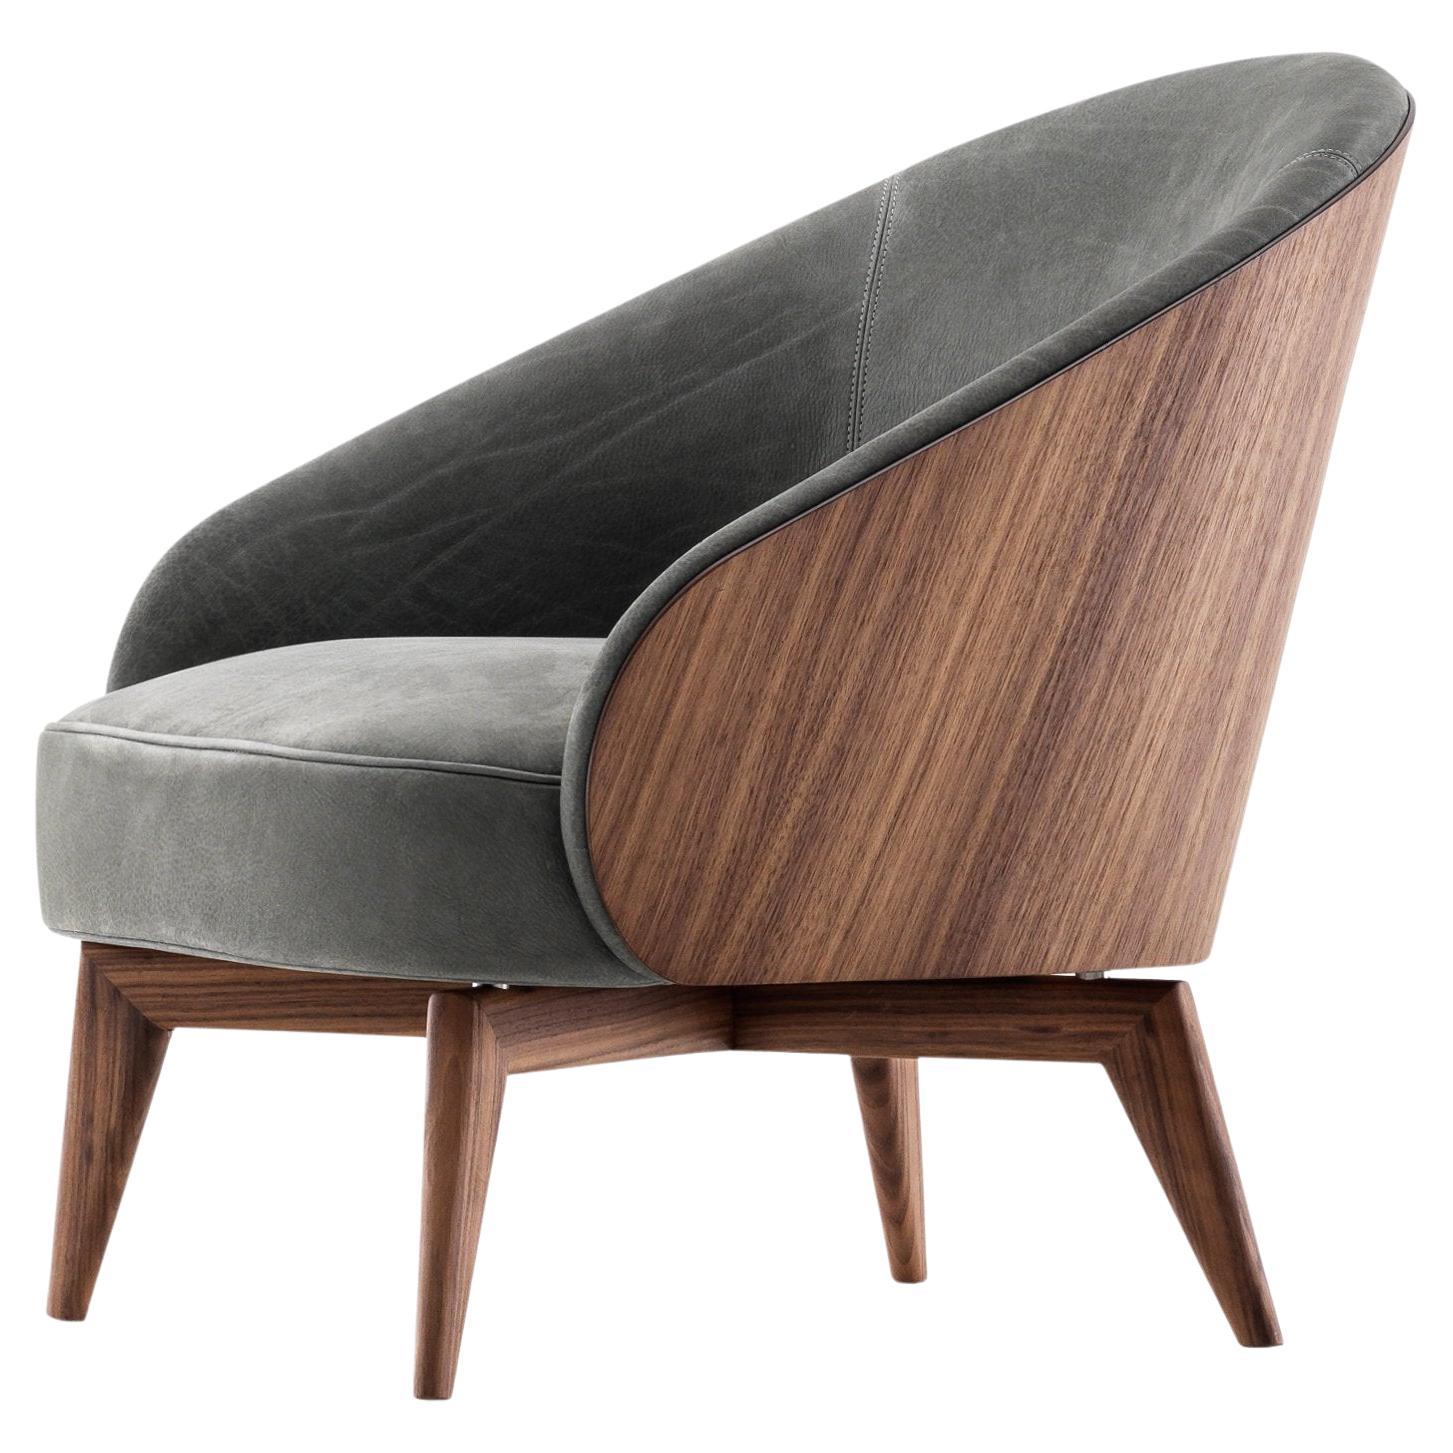 Upholstered, Leather, Solid Walnut, Sarah Armchair For Sale at 1stDibs